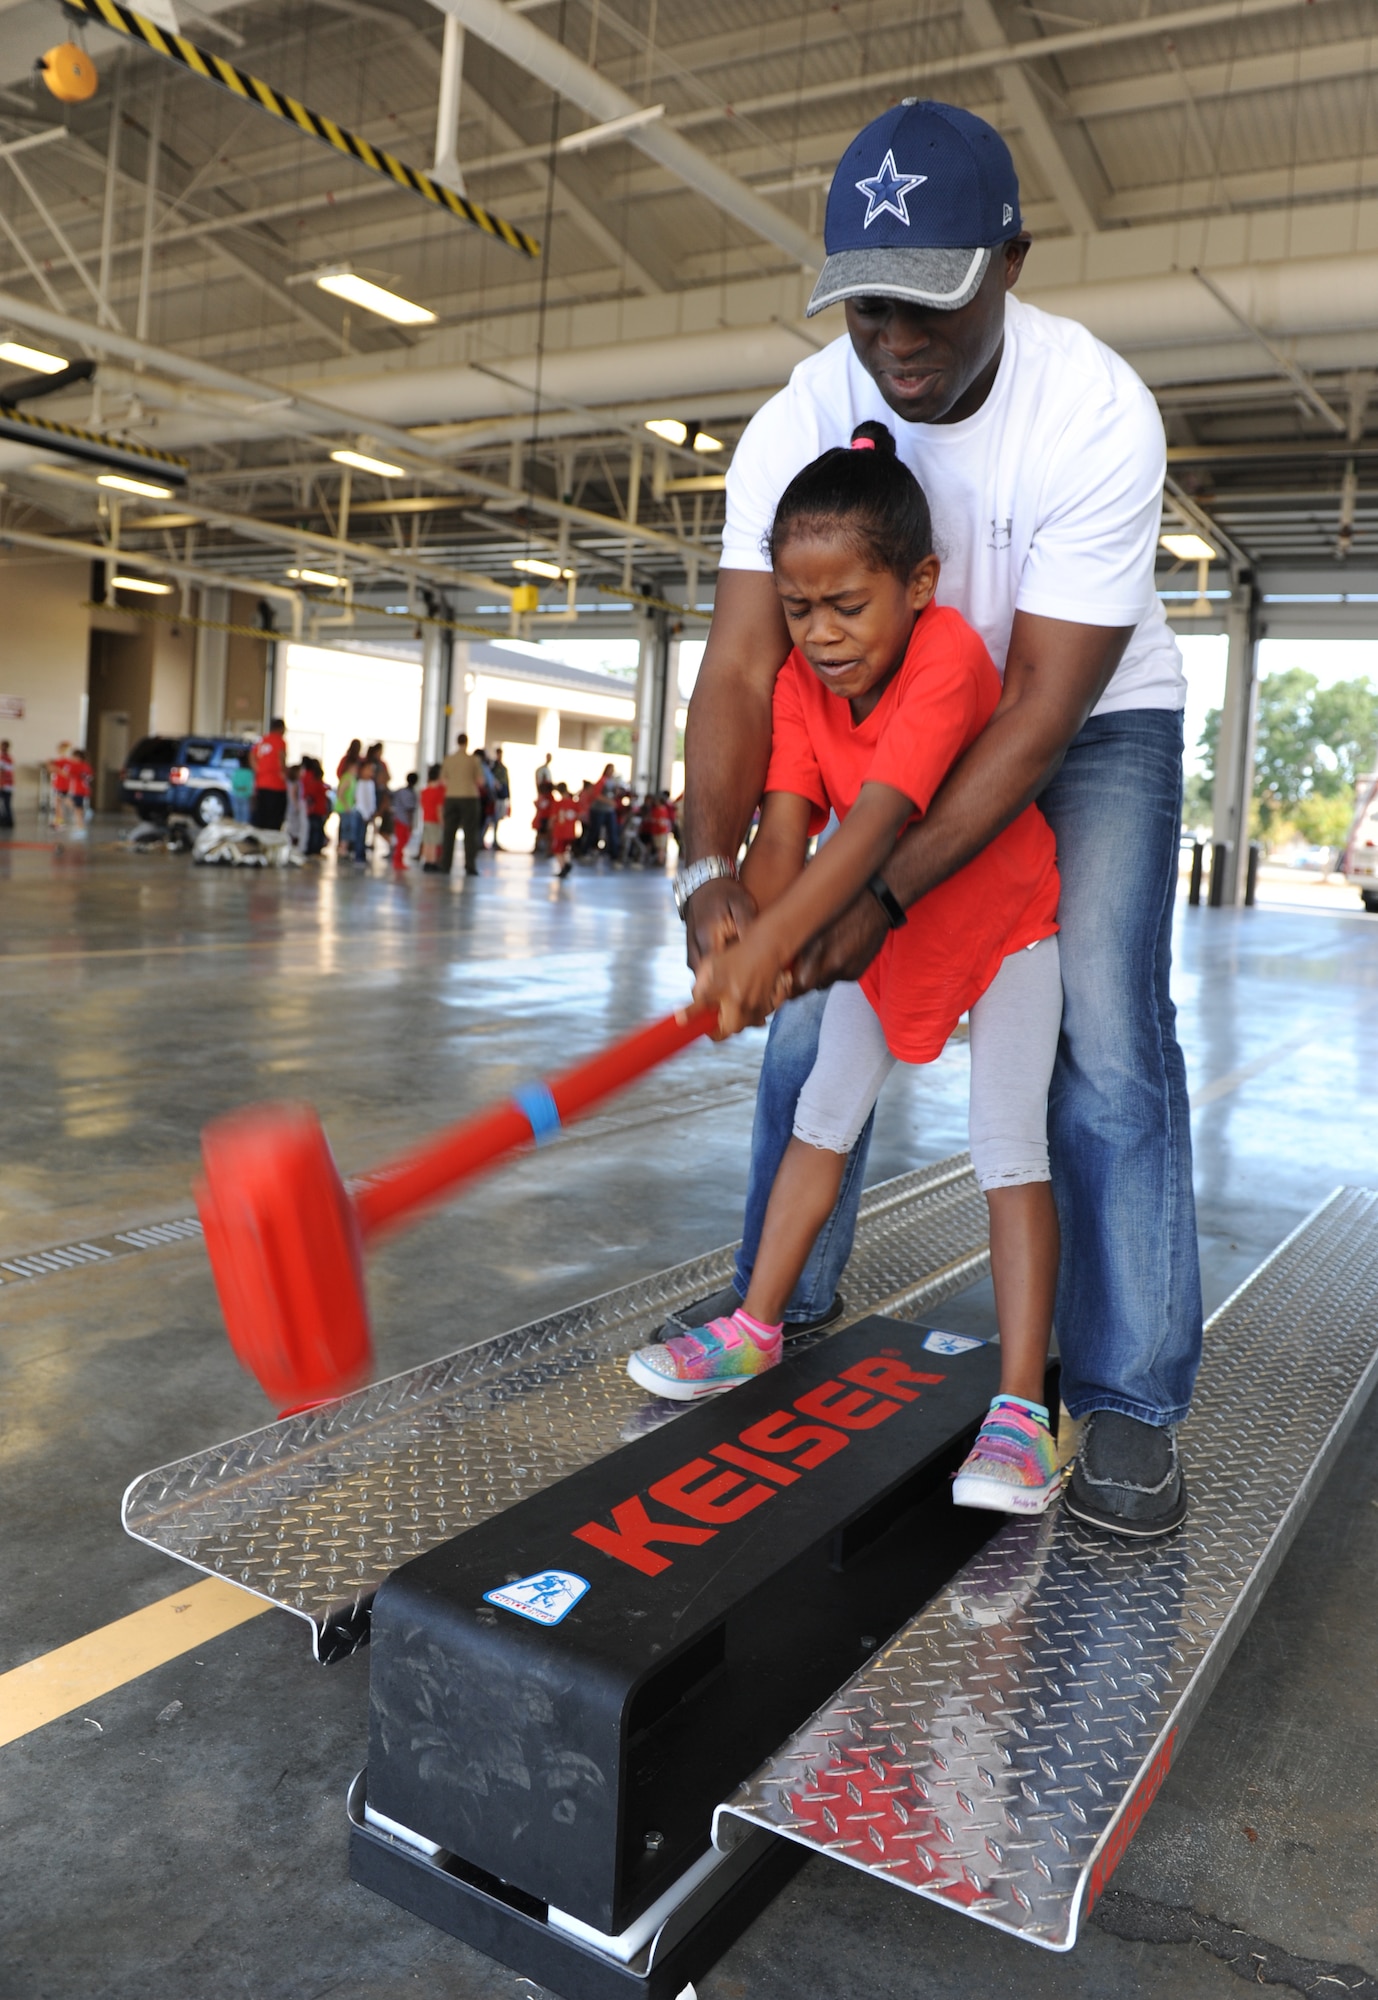 Senior Master Sgt. Larry Jackson, 81st Operations Support Flight tower controller chief, assists his daughter, Lilliana, with swinging a sledge hammer at the Keesler Fire Department during a Jeff Davis Elementary School first graders’ field trip Oct. 28, 2016, on Keesler Air Force Base, Miss. The children also toured the 81st Security Forces Squadron. (U.S. Air Force photo by Kemberly Groue/Released) 